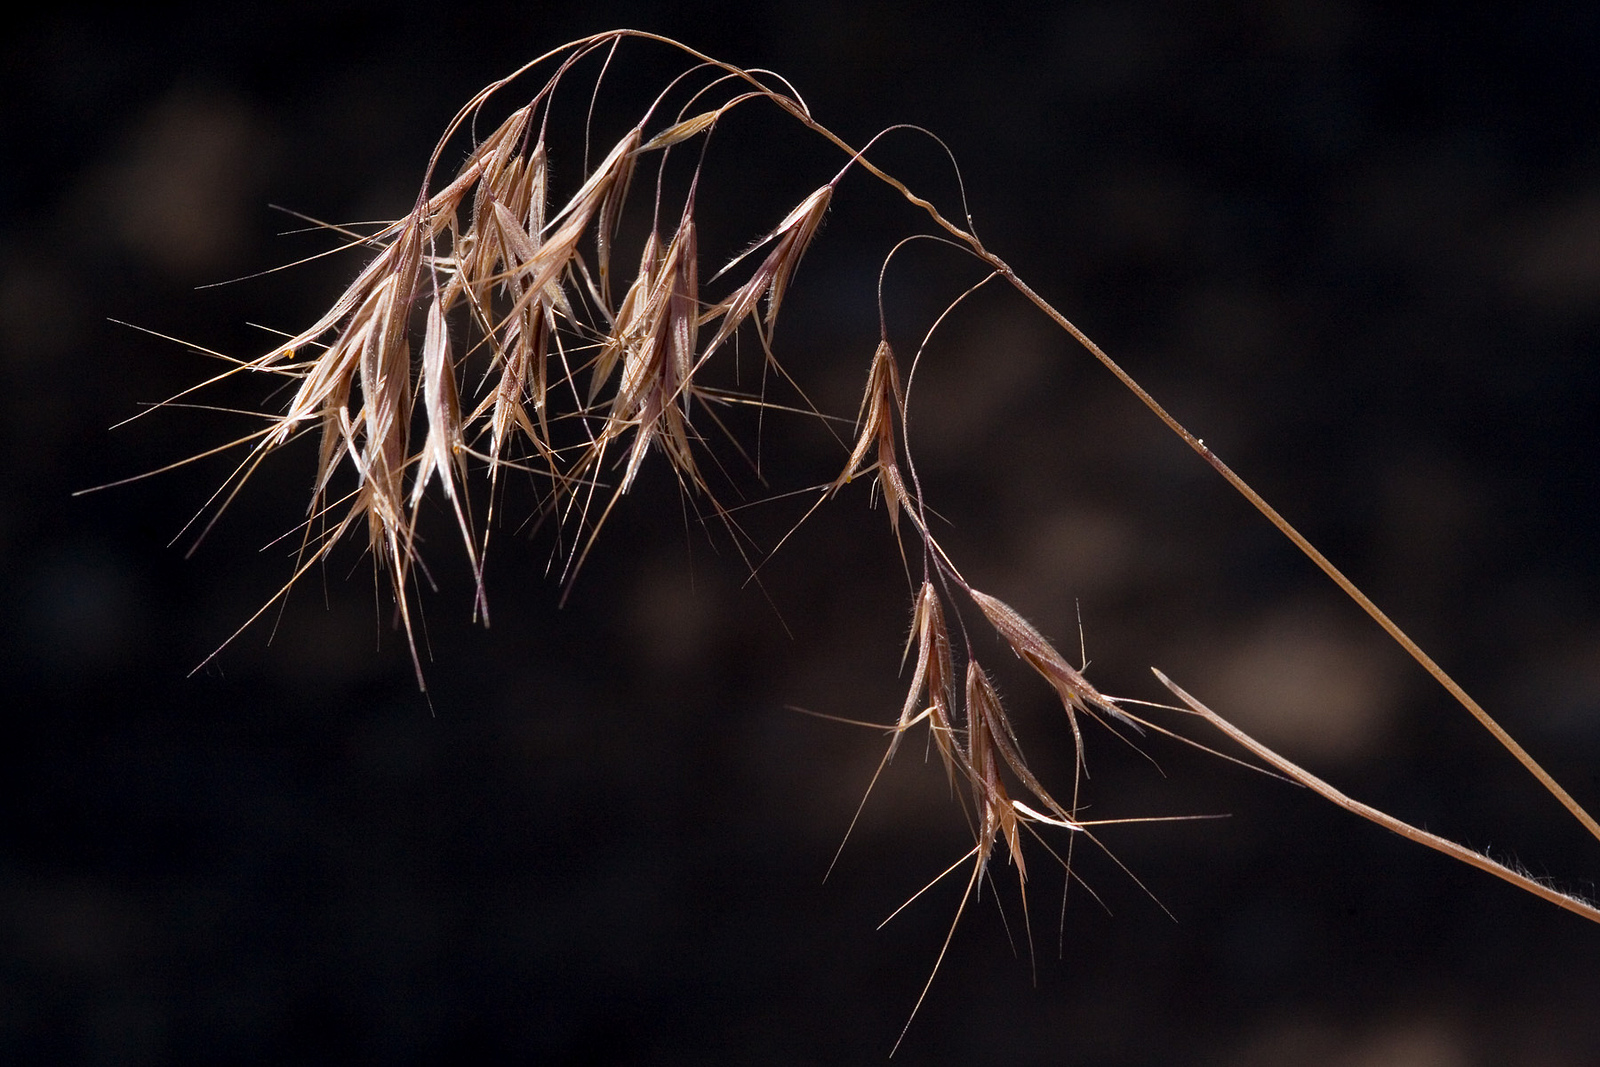 Open panicle with dry seeds and barbed awns